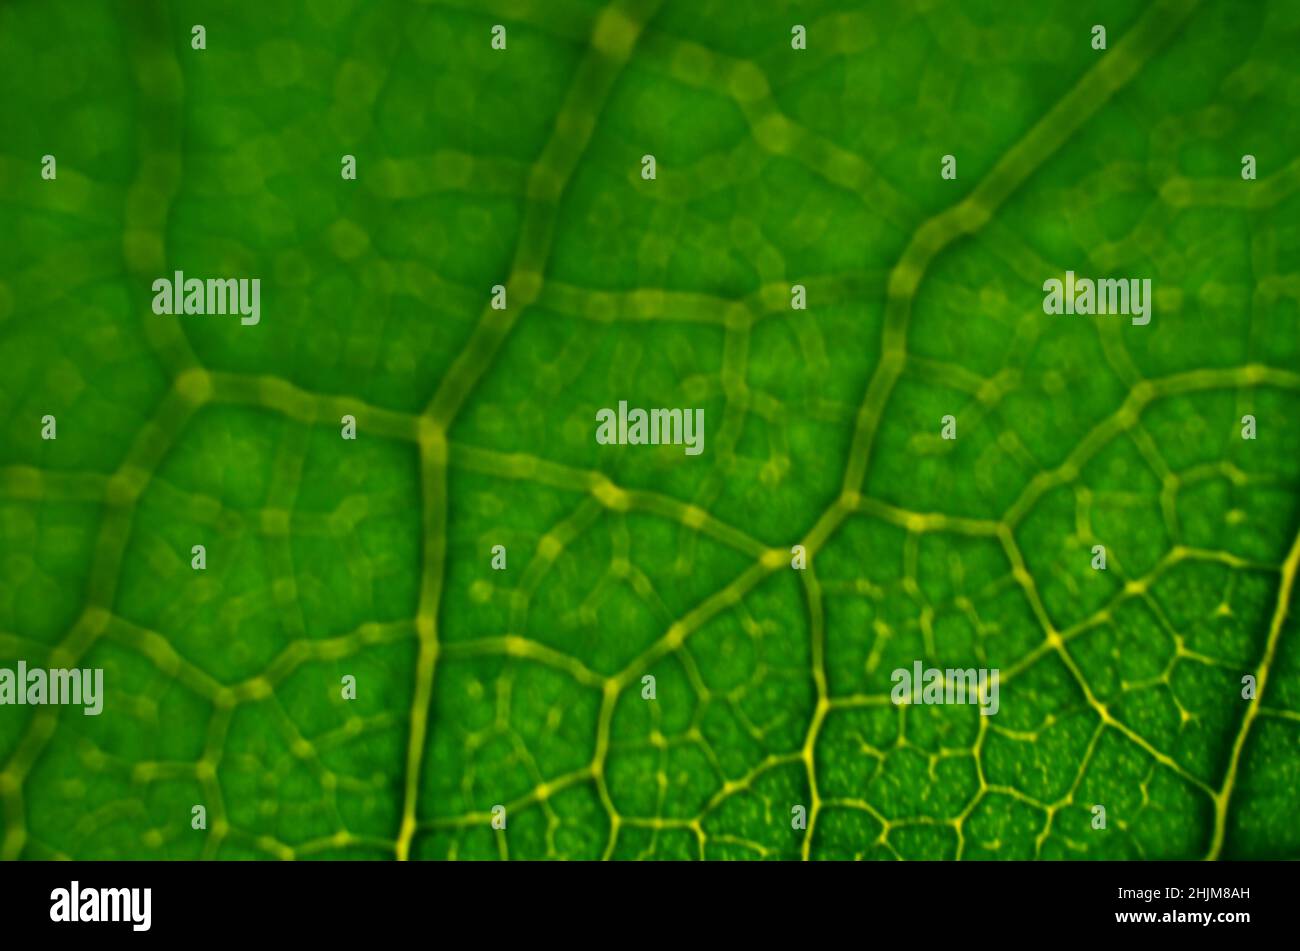 Close-up of a defocused image of green leaf texture. Abstract green background with copy space. Stock Photo